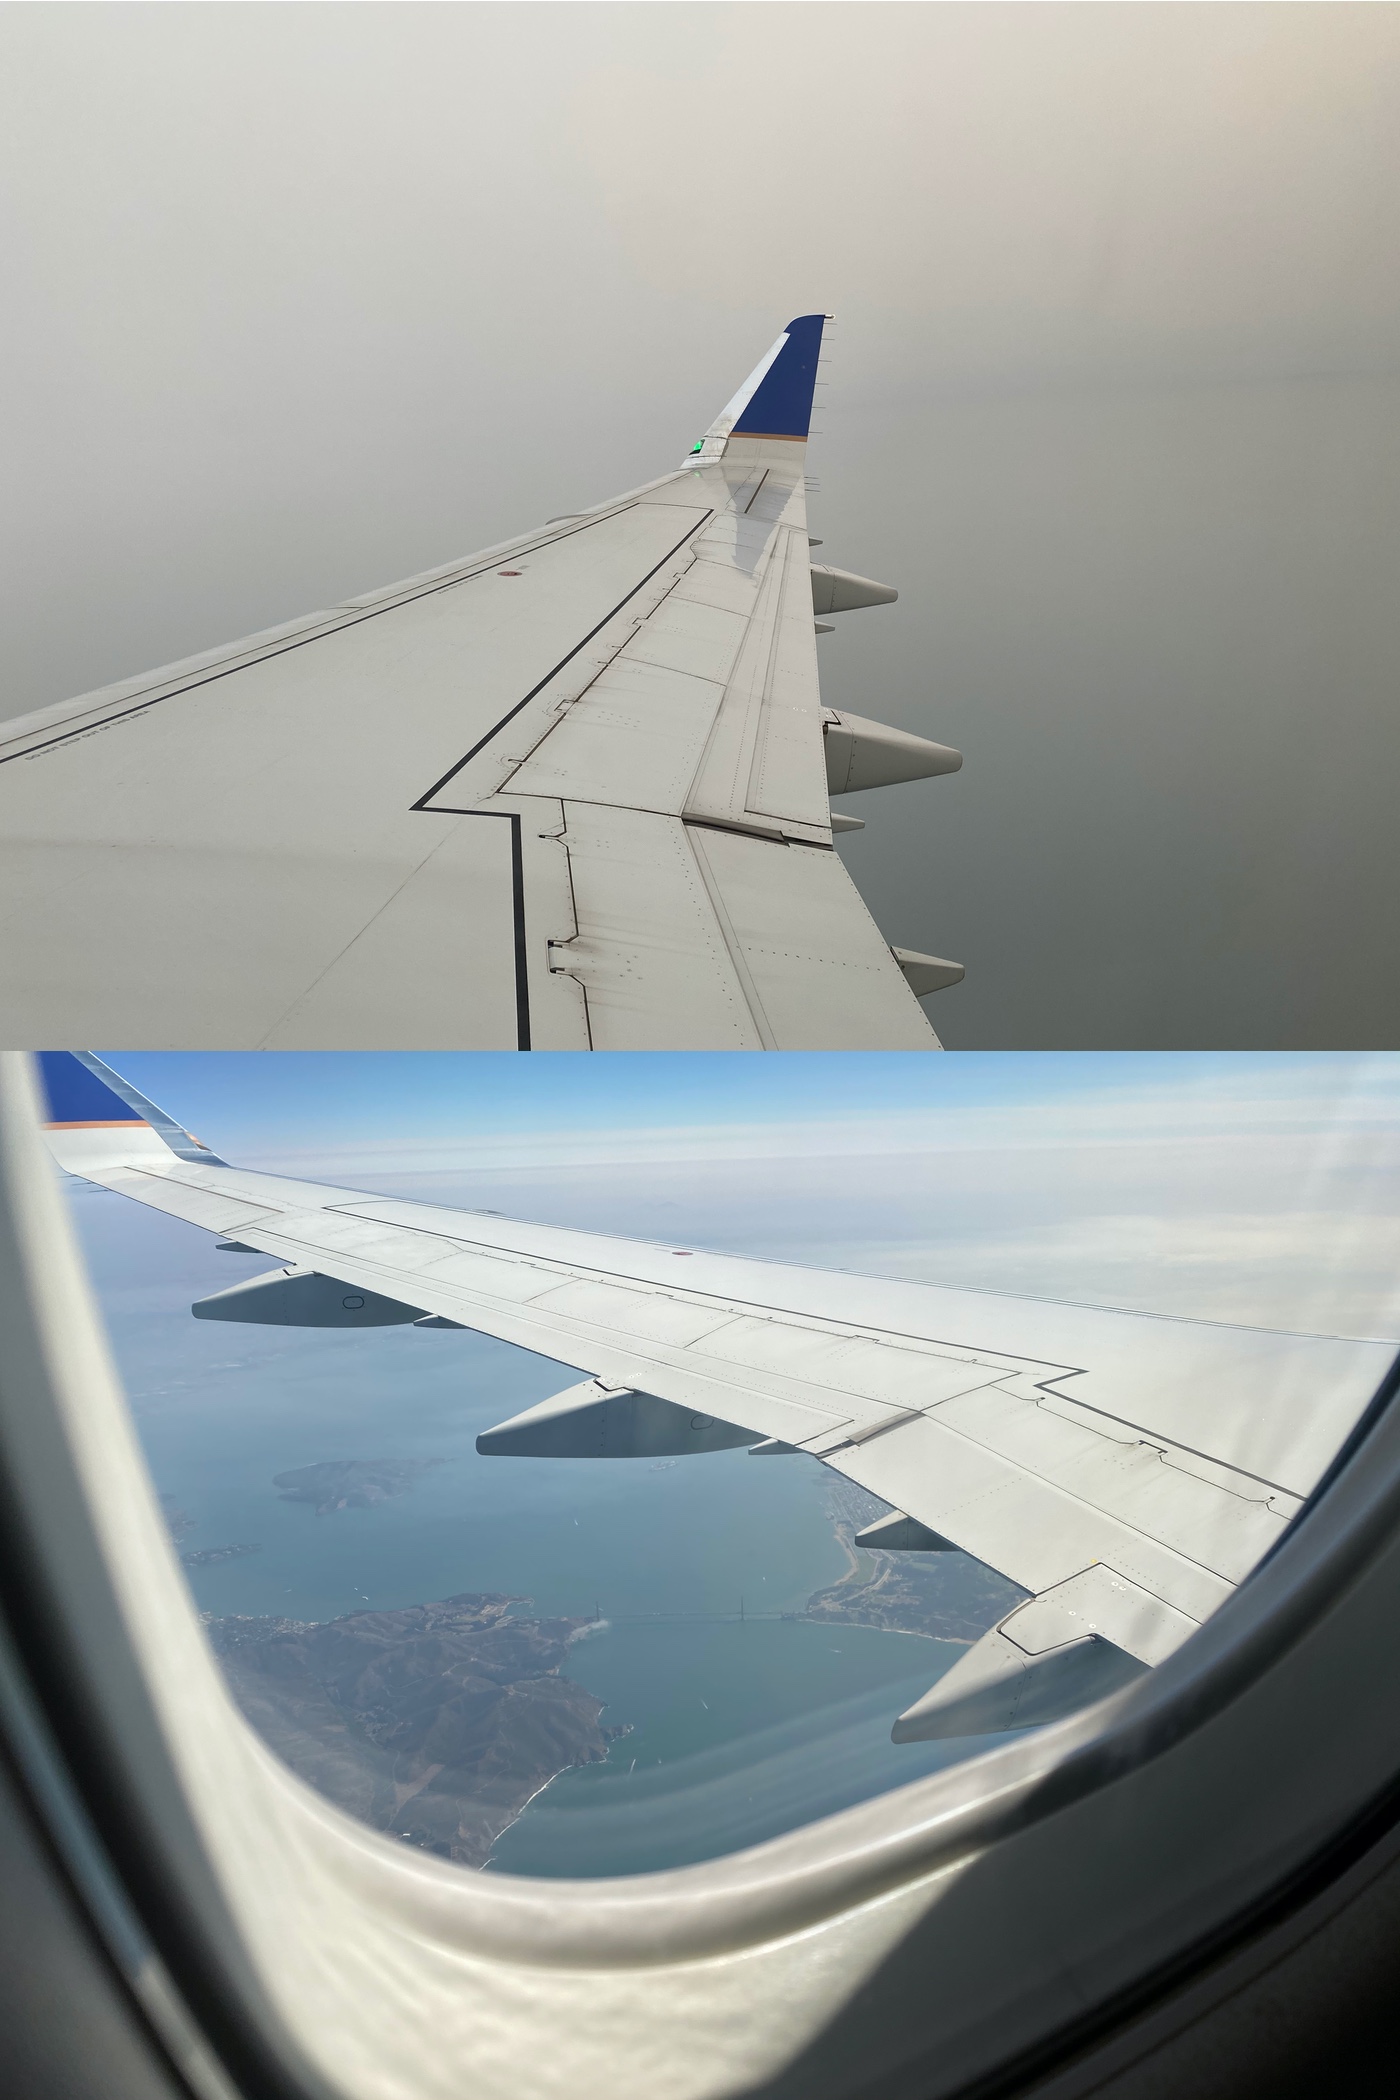 Two pictures being taken from a plane's window, the first showing nothing but gray smoke, the second showing a clear sky and a view of the Golden Gate Bridge from above.